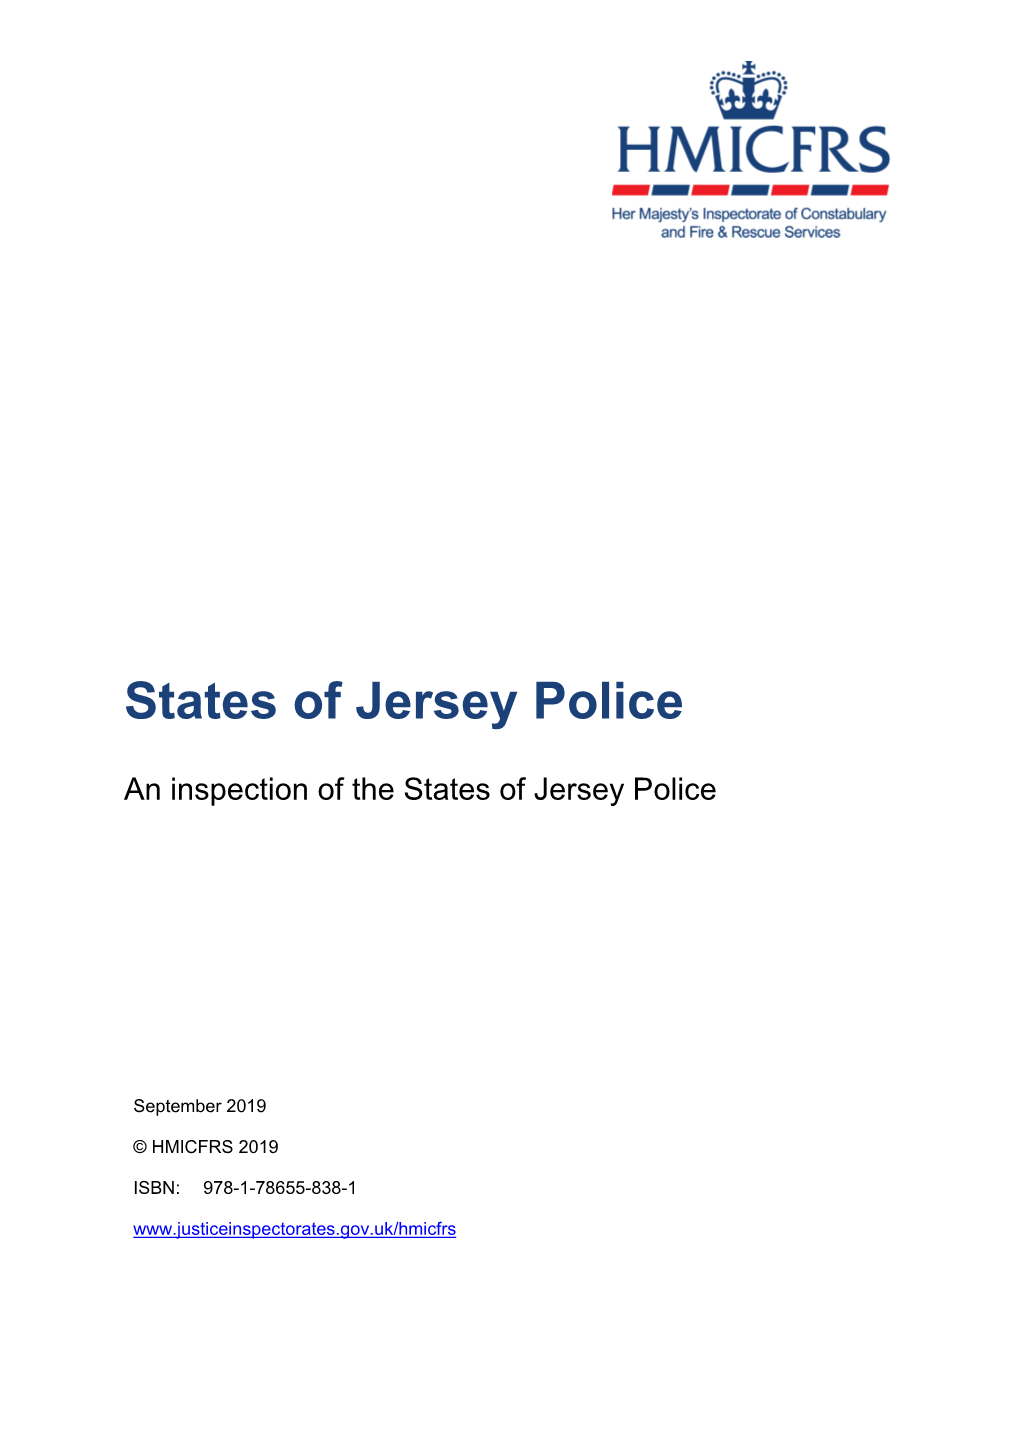 An Inspection of the States of Jersey Police